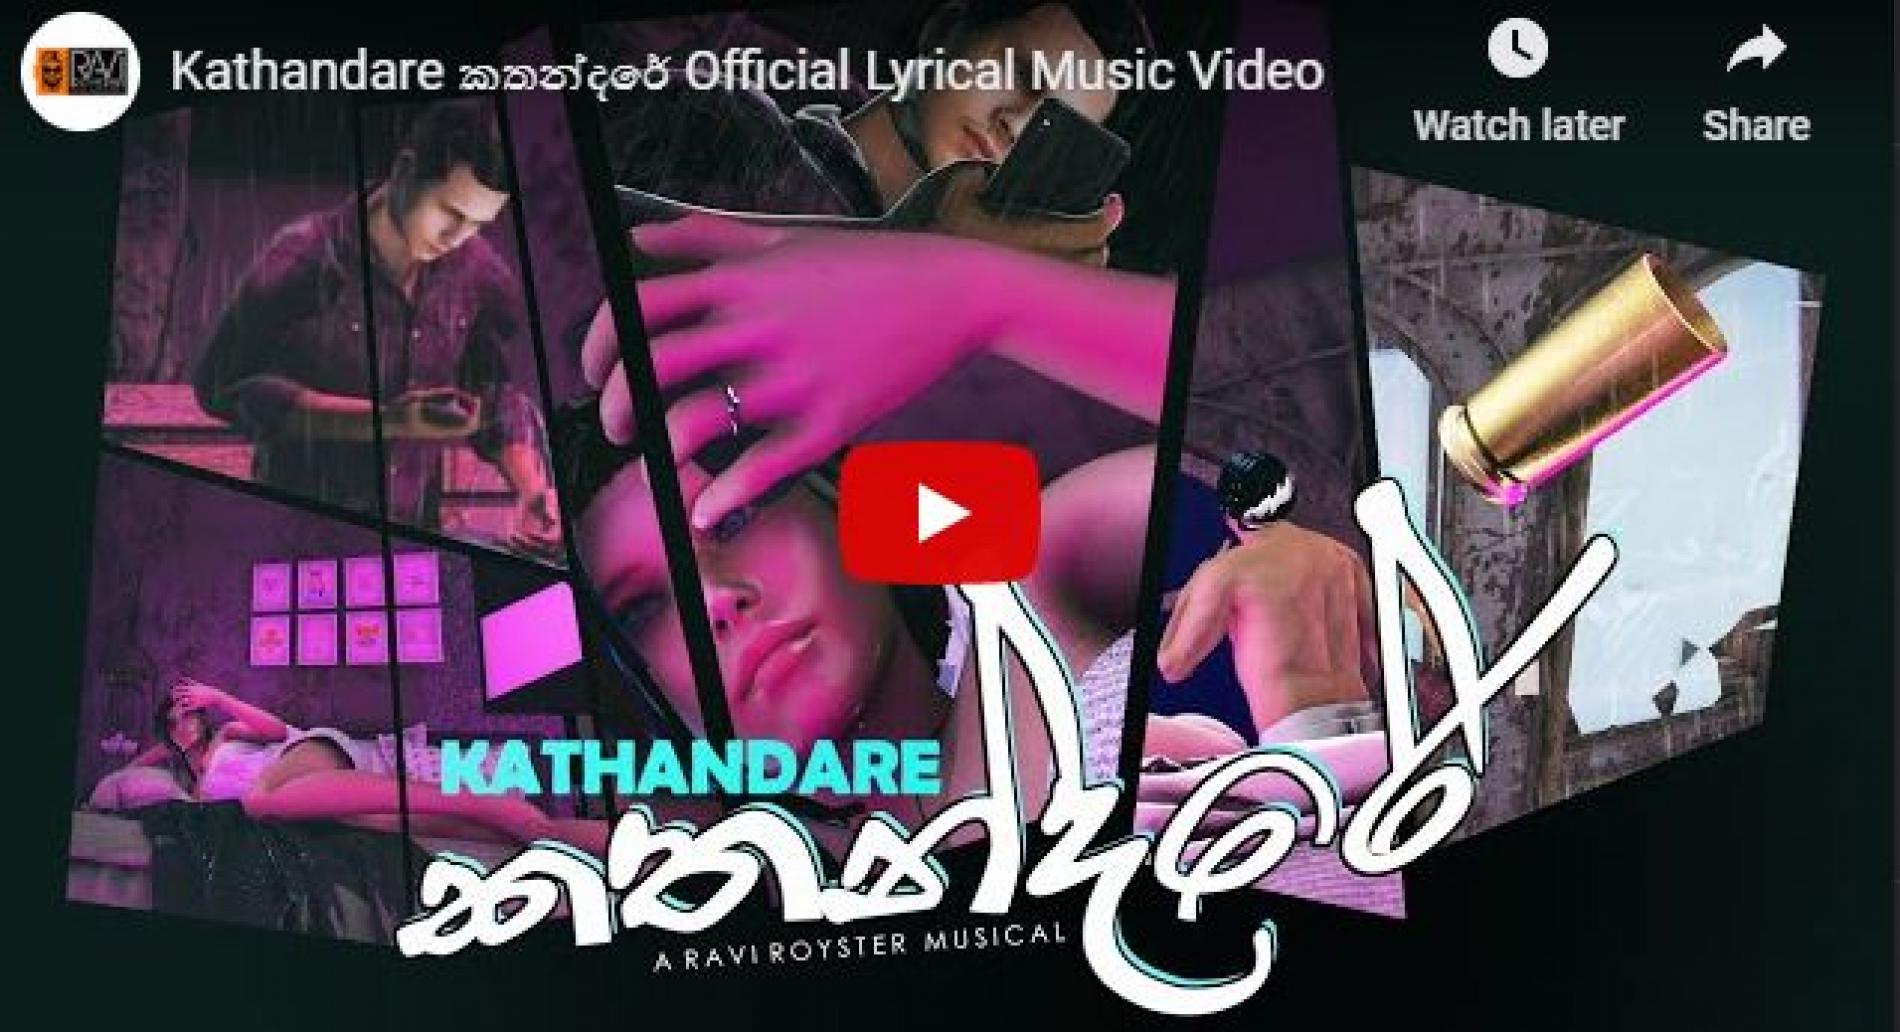 Sri Lanka’s First 3D Lyric Video Is Out!